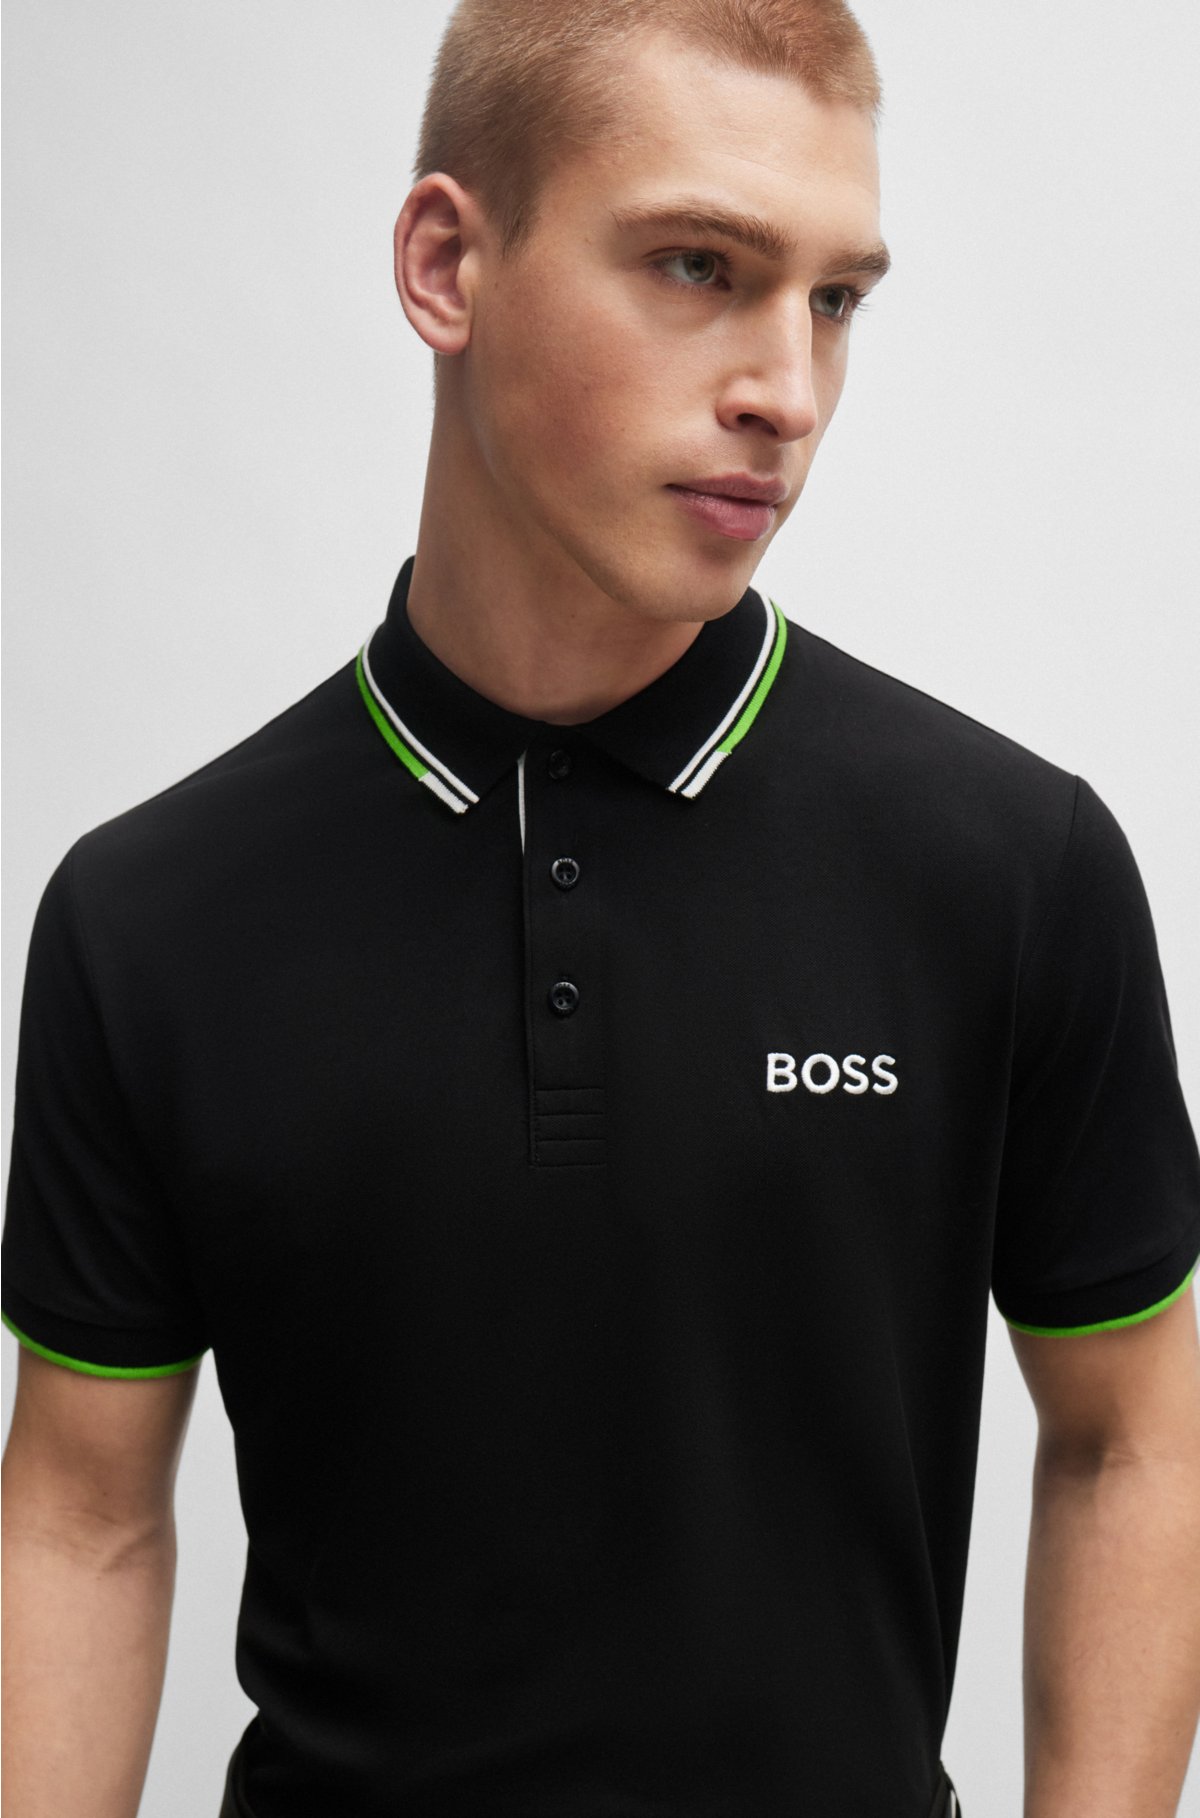 Steward Vellykket forsøg BOSS - Polo shirt with contrast logos